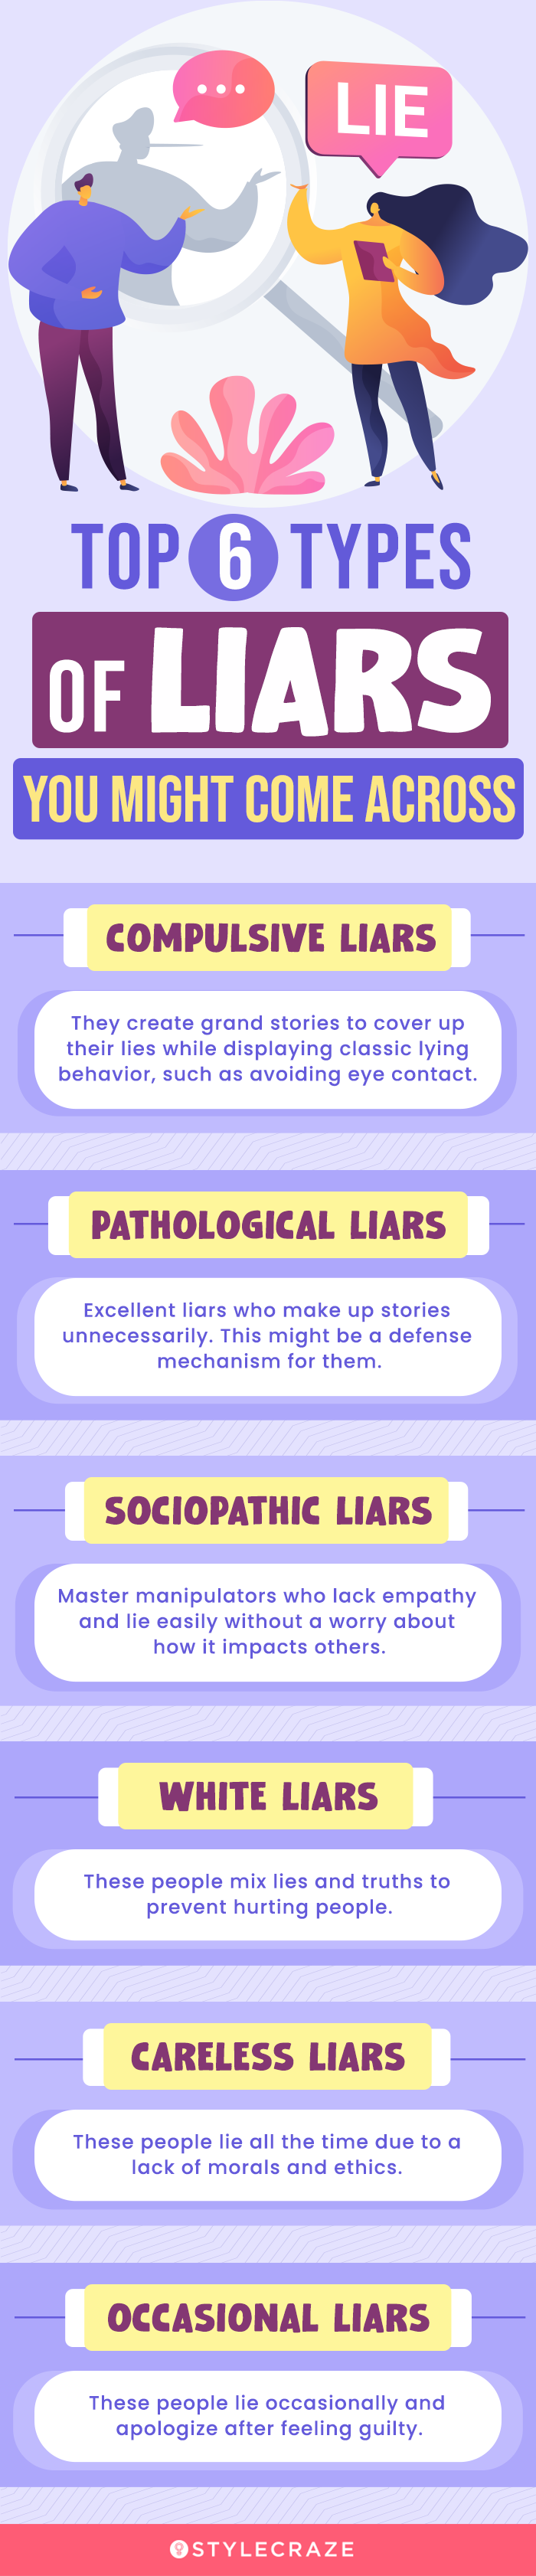 top 6 varieties of liars you might come across (infographic)